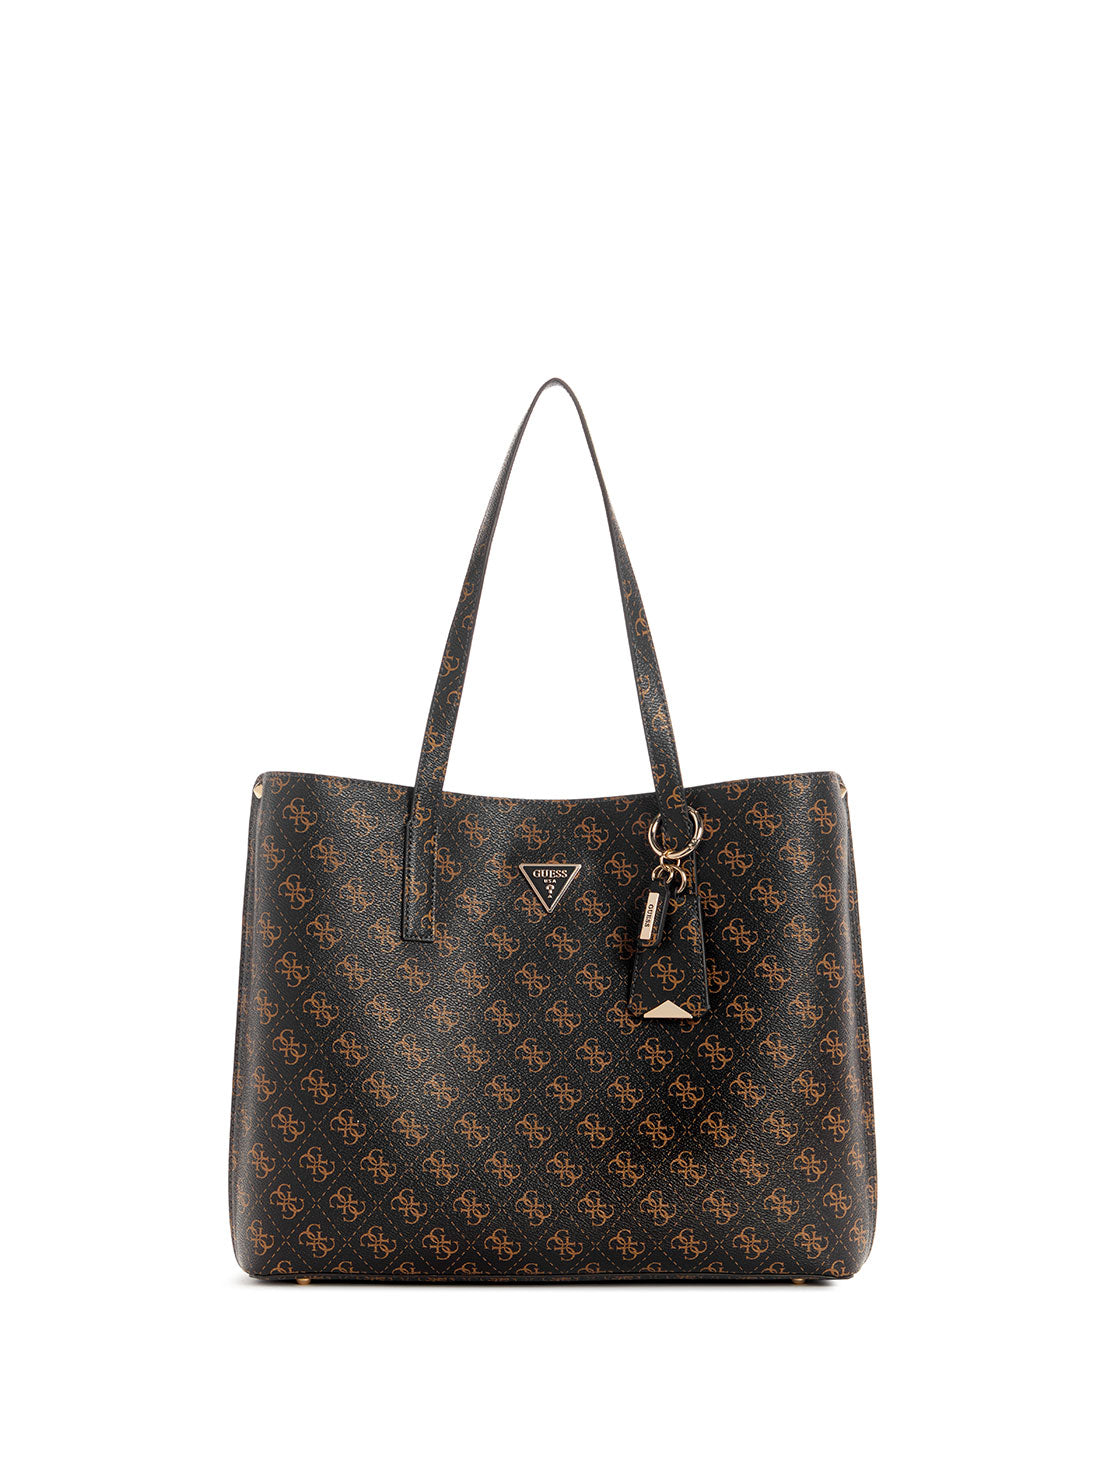 GUESS Brown Logo Meridian Tote Bag front view